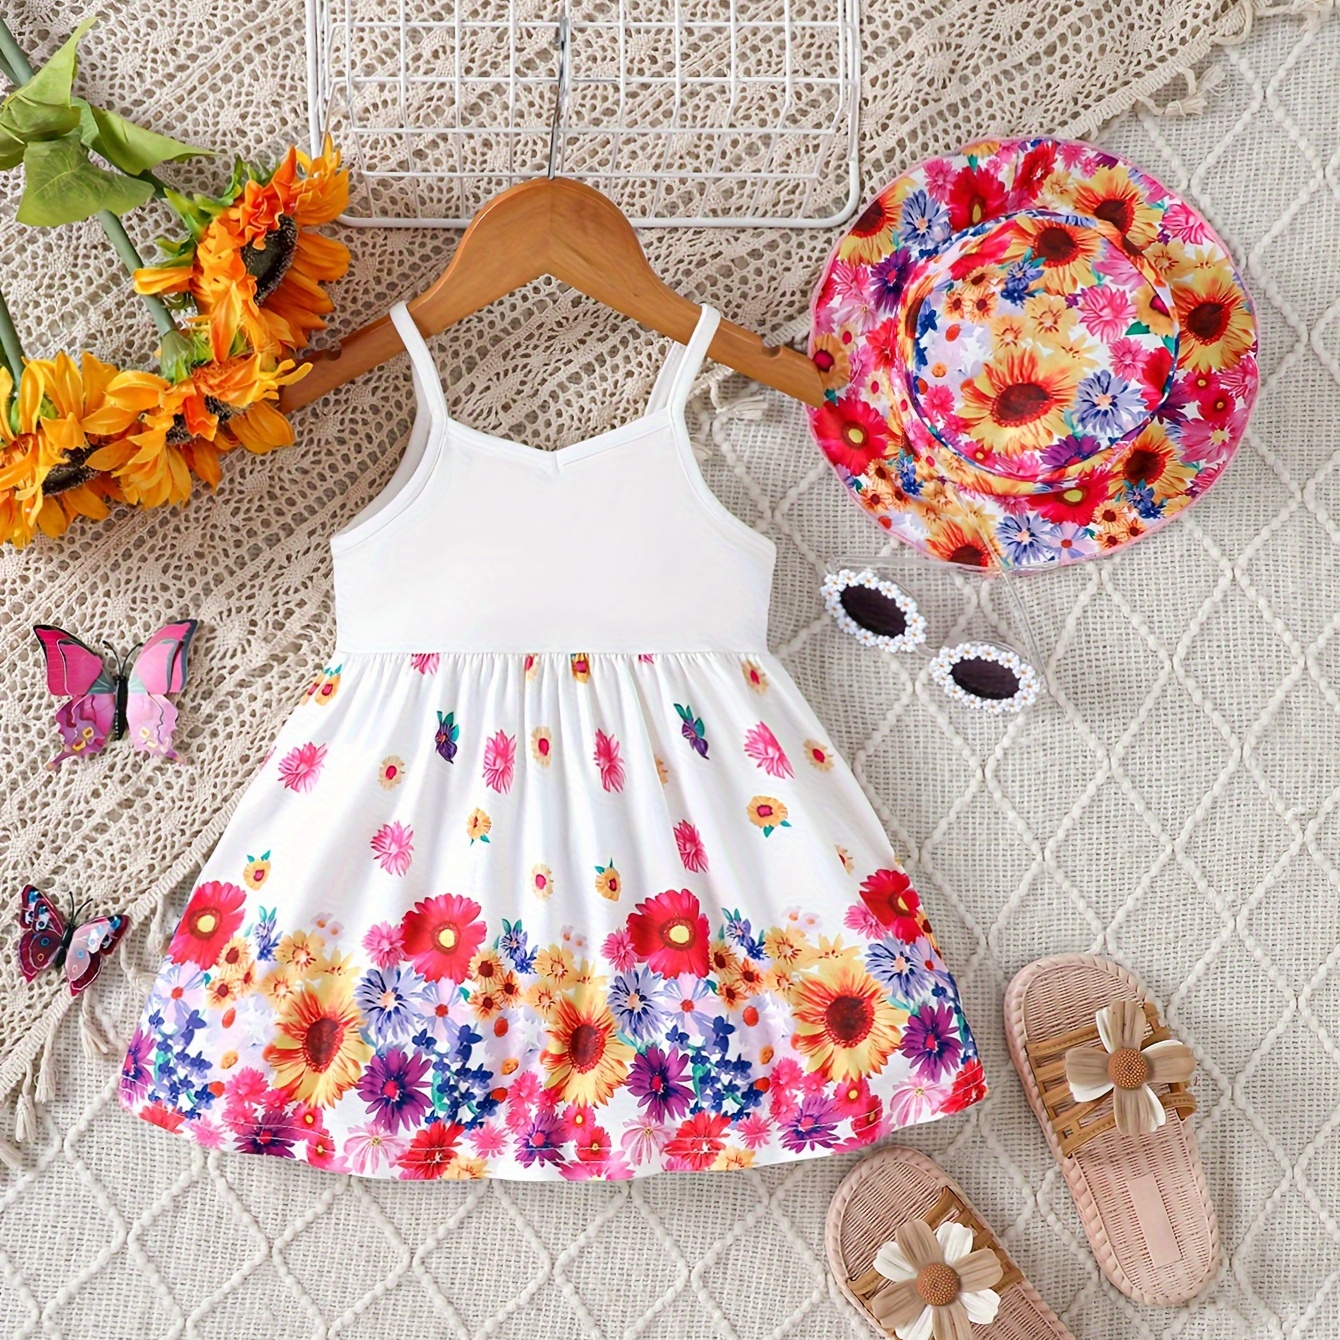 

Baby Girl's Camisole Dress & Hat, Colorful Flower Print Casual Baby's Clothes For Summer